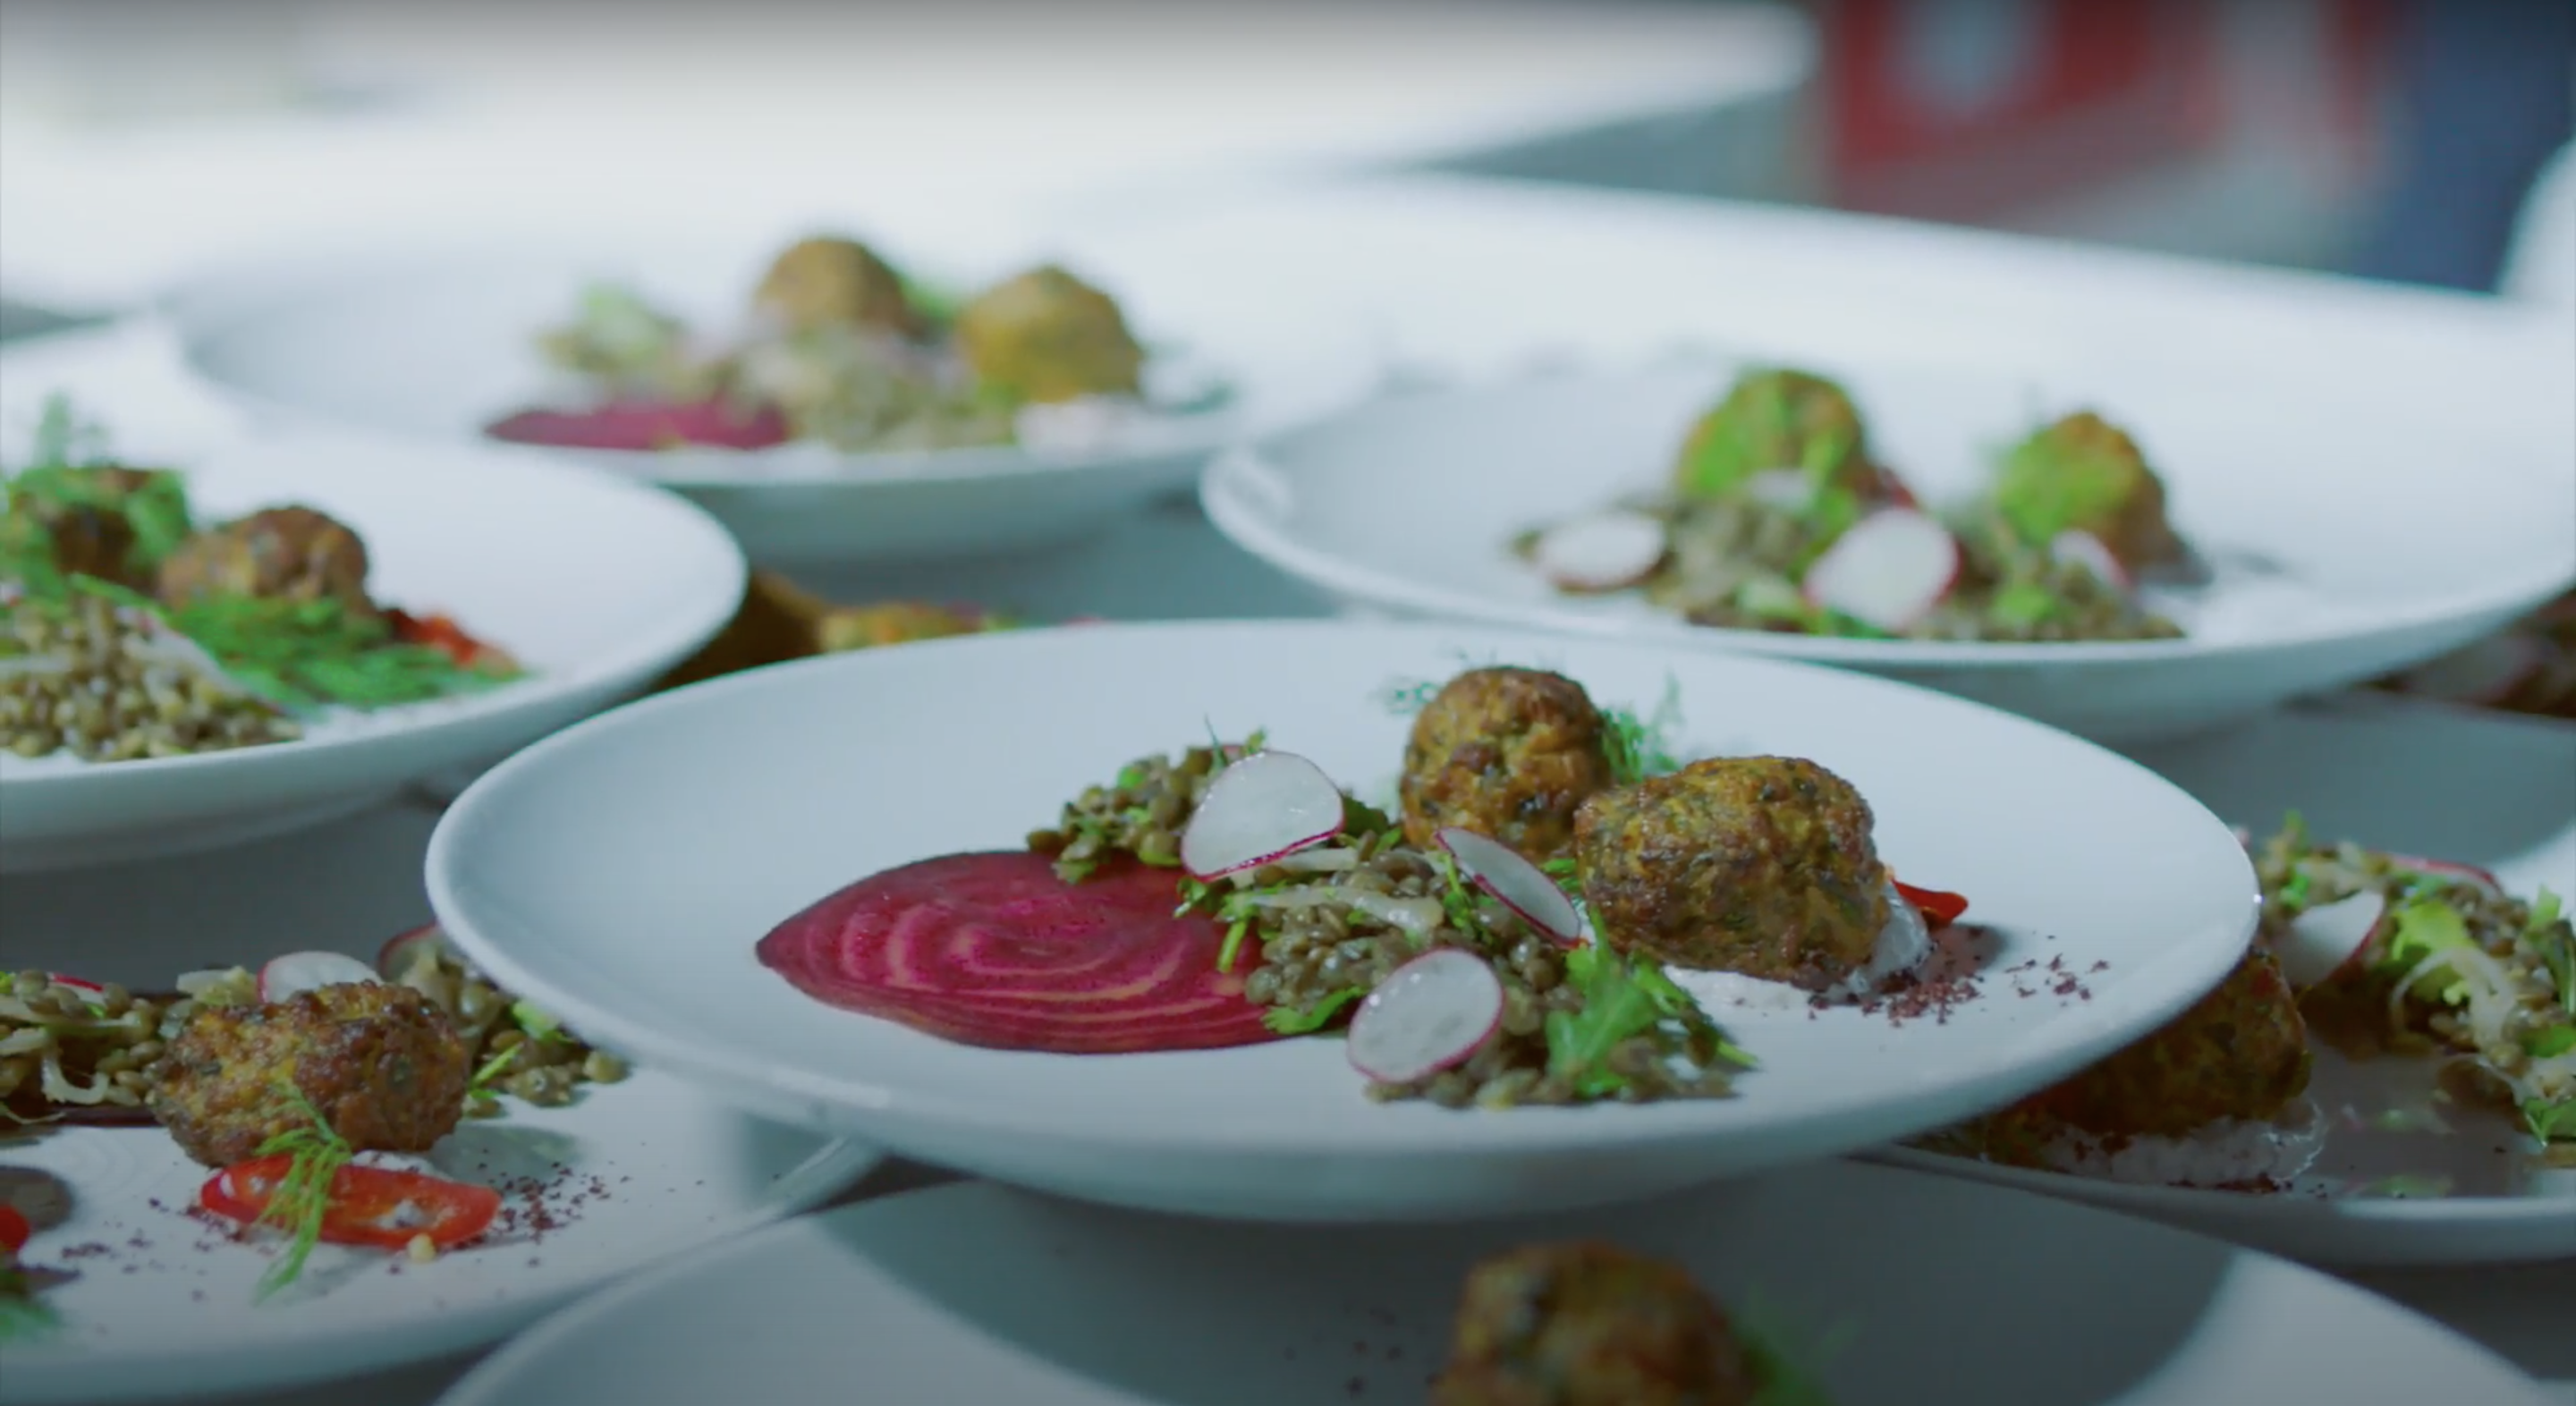 Plated appetisers with a slice of beetroot and salad by Sami Tamimi for Years of Culture Opening ceremony.